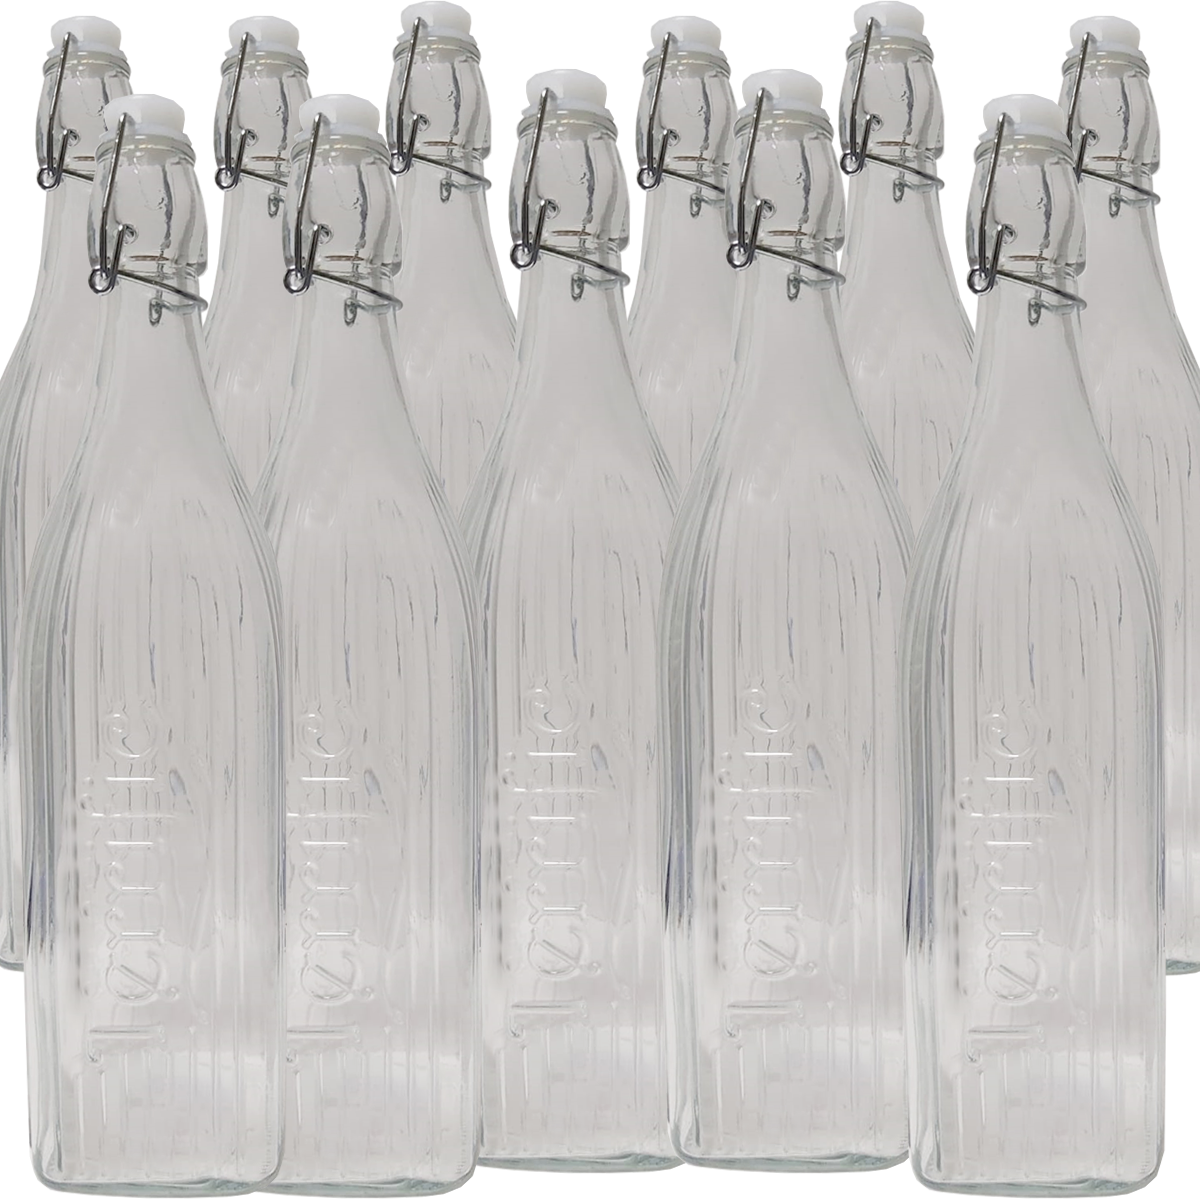 1000 ml Square Base Stripe Design Glass Bottles for Home Brewing with Easy Wire Swing Cap - 12 Pc Pack